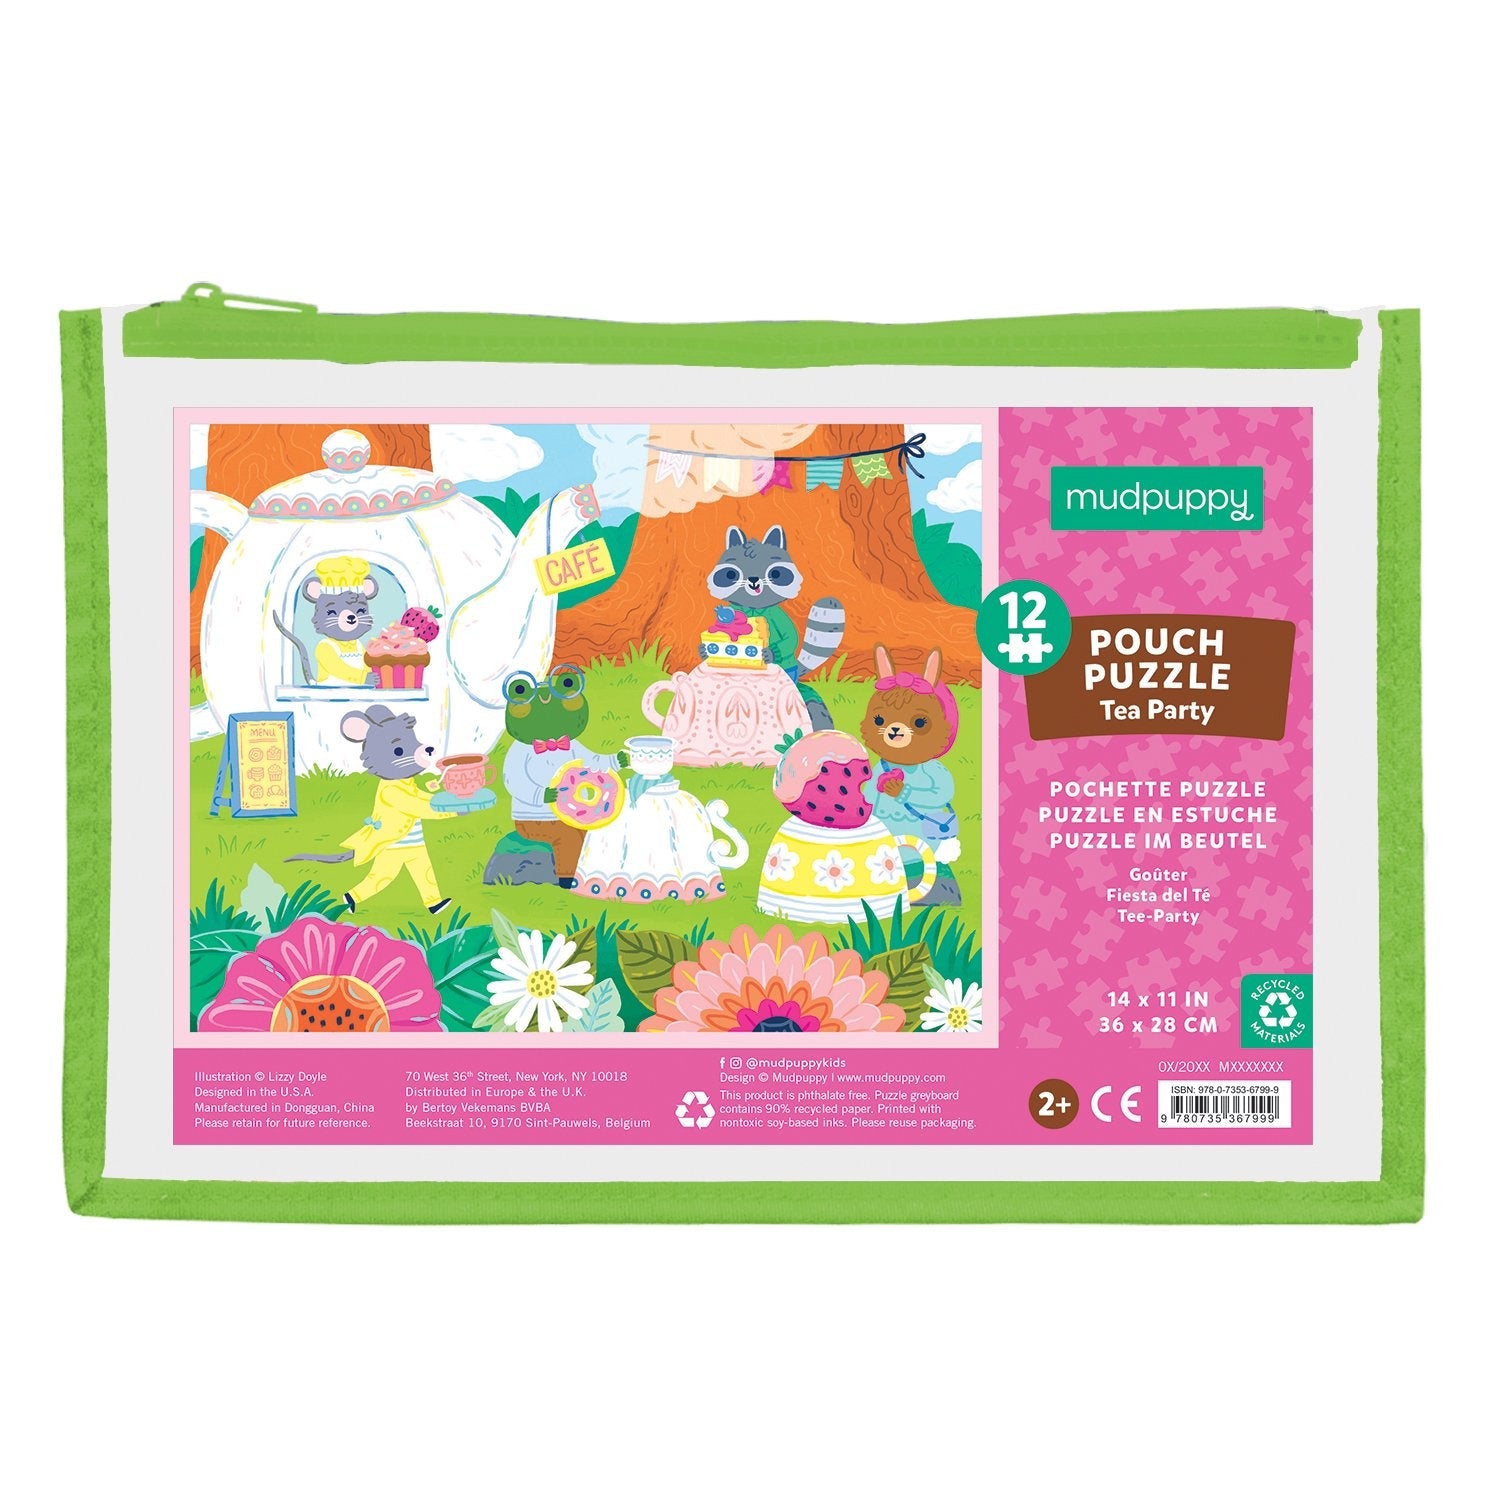 Mudpuppy On the Farm Pouch Puzzle - 12 Pieces